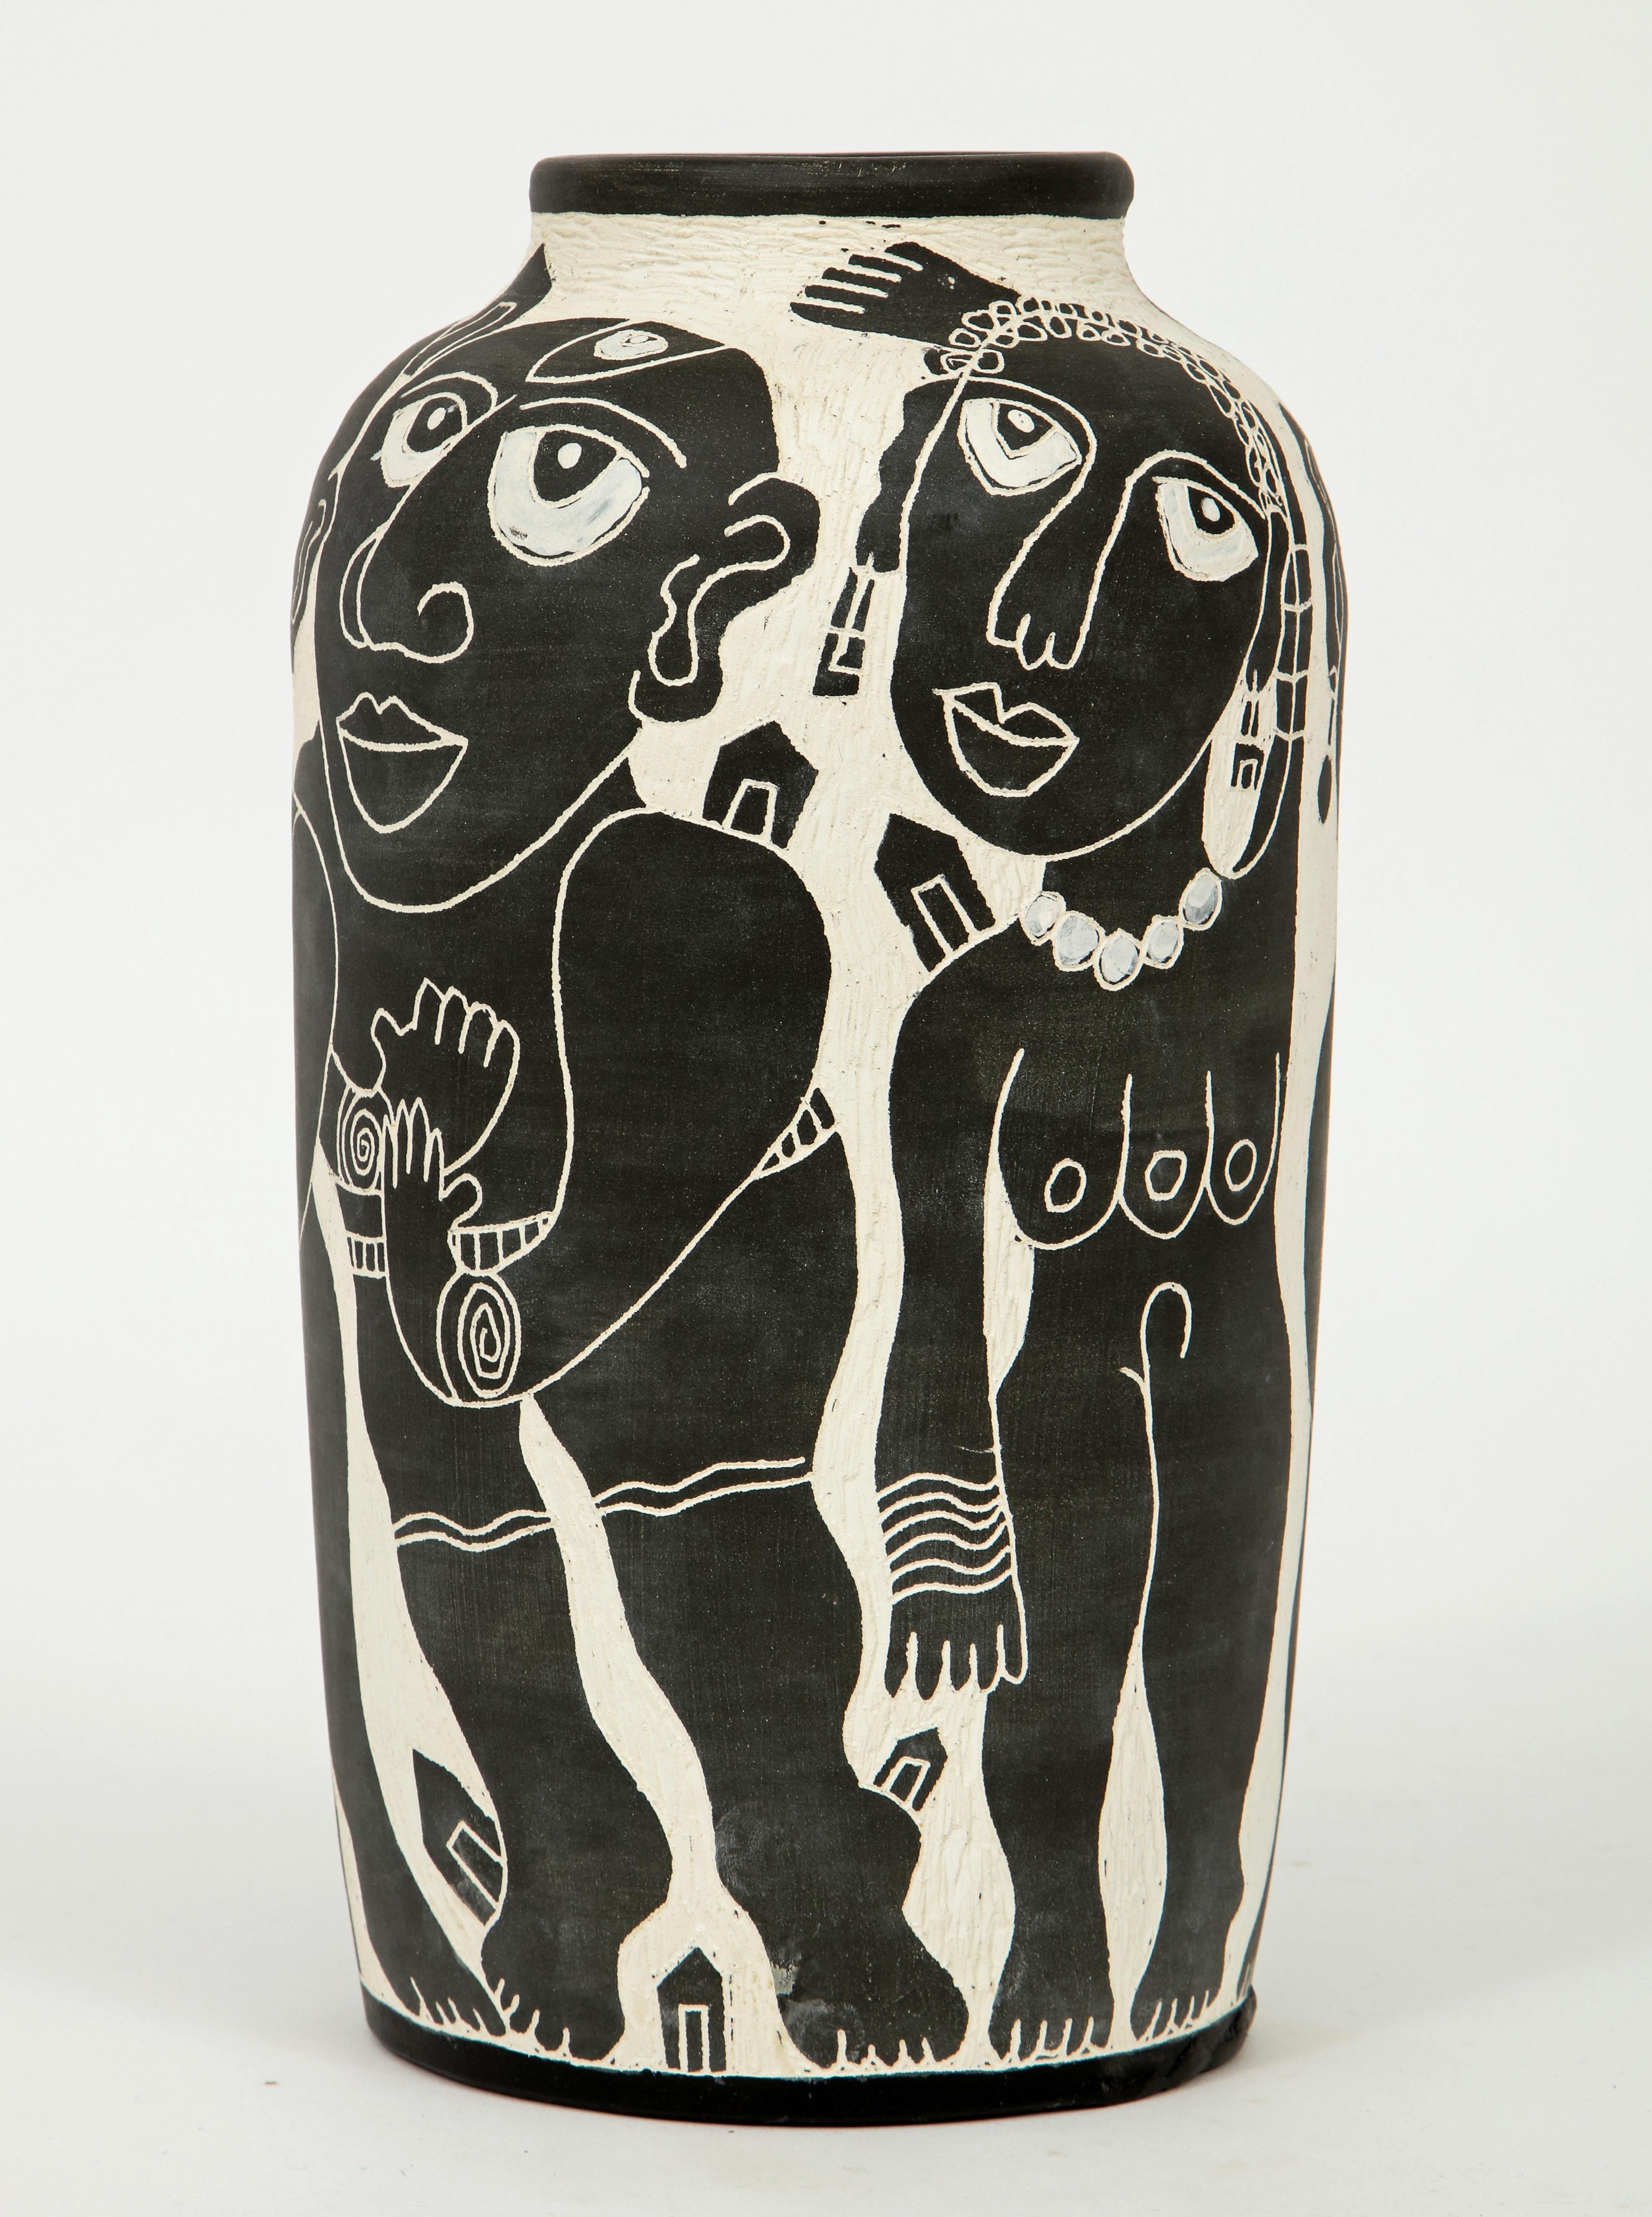 Fabulous example of Washington Ledesma's hand-carved sculptural ceramic work at it's best with various nude and semi nude women and men circling this vase. He is considered to be one of Latin America's most significant artists living in the United